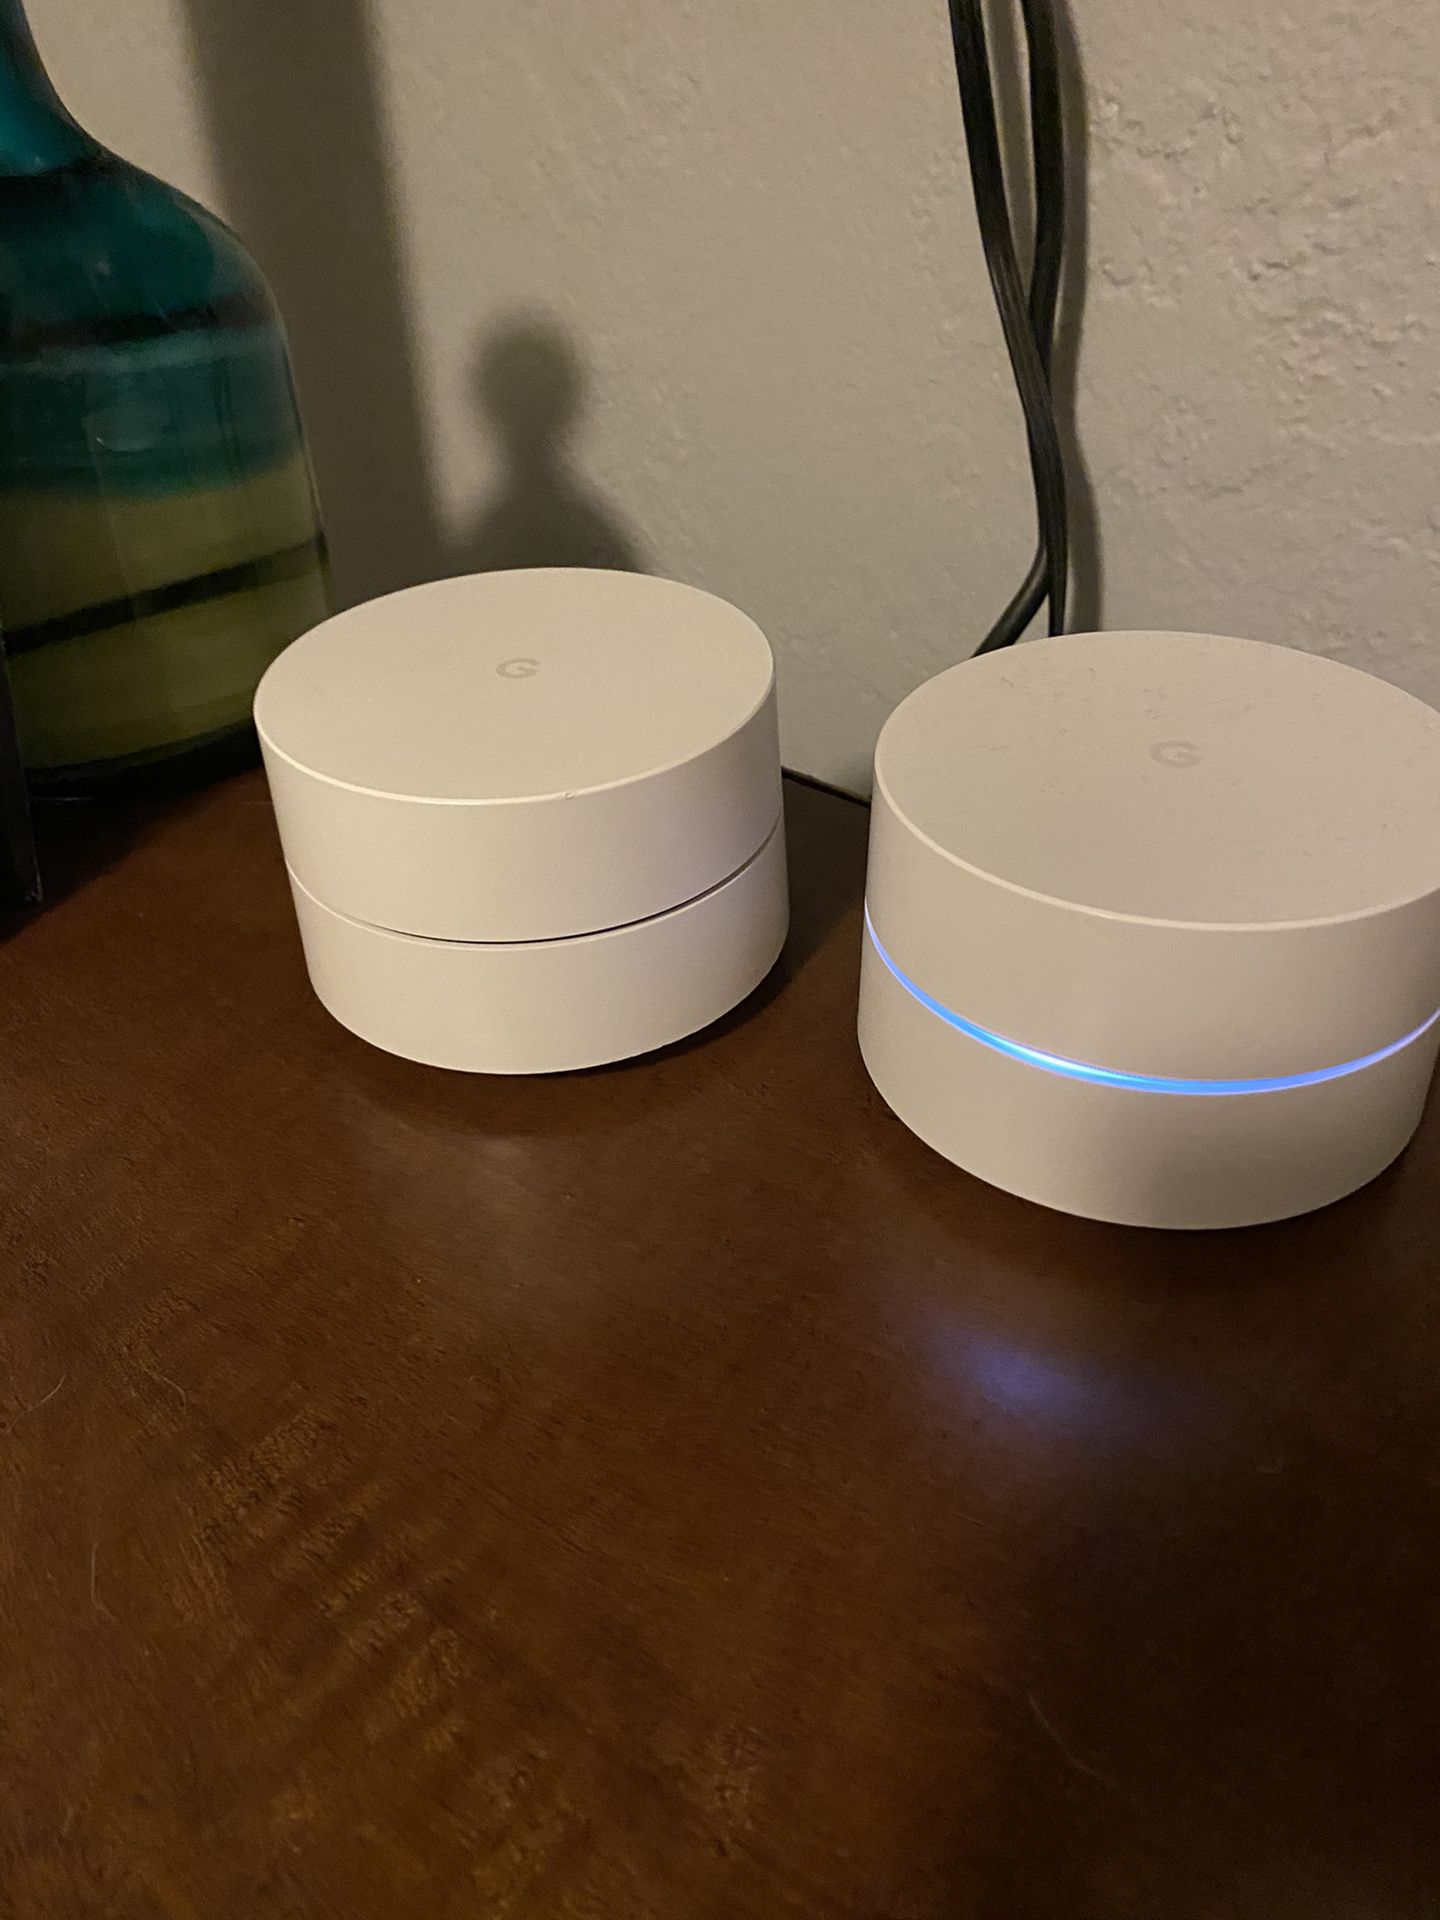 2 Google WiFi Routers